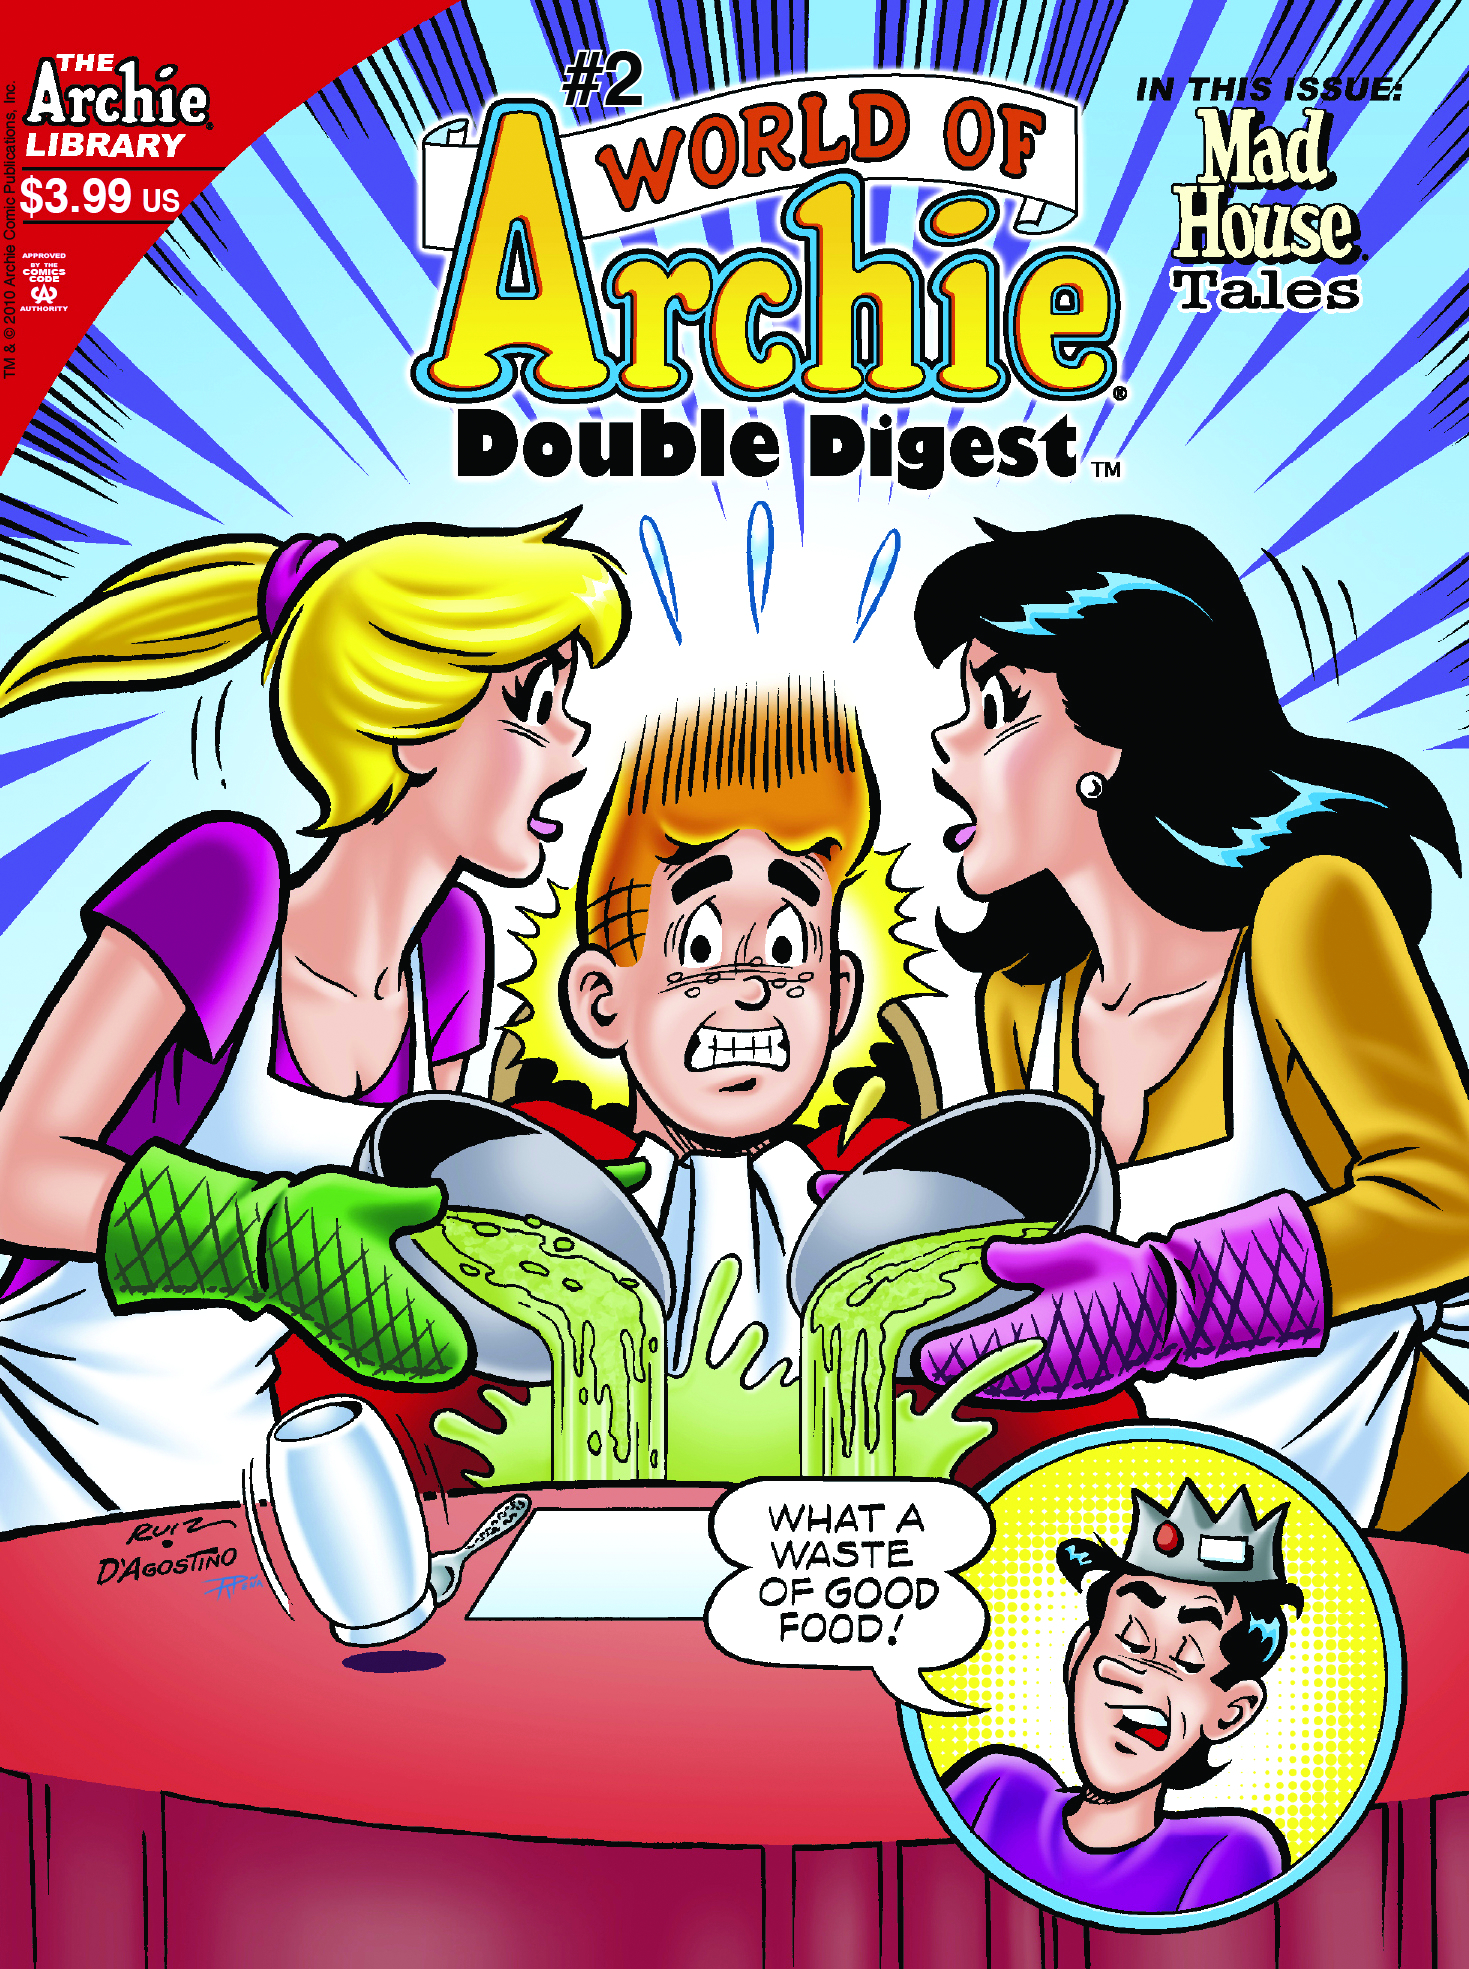 WORLD OF ARCHIE DOUBLE DIGEST #2